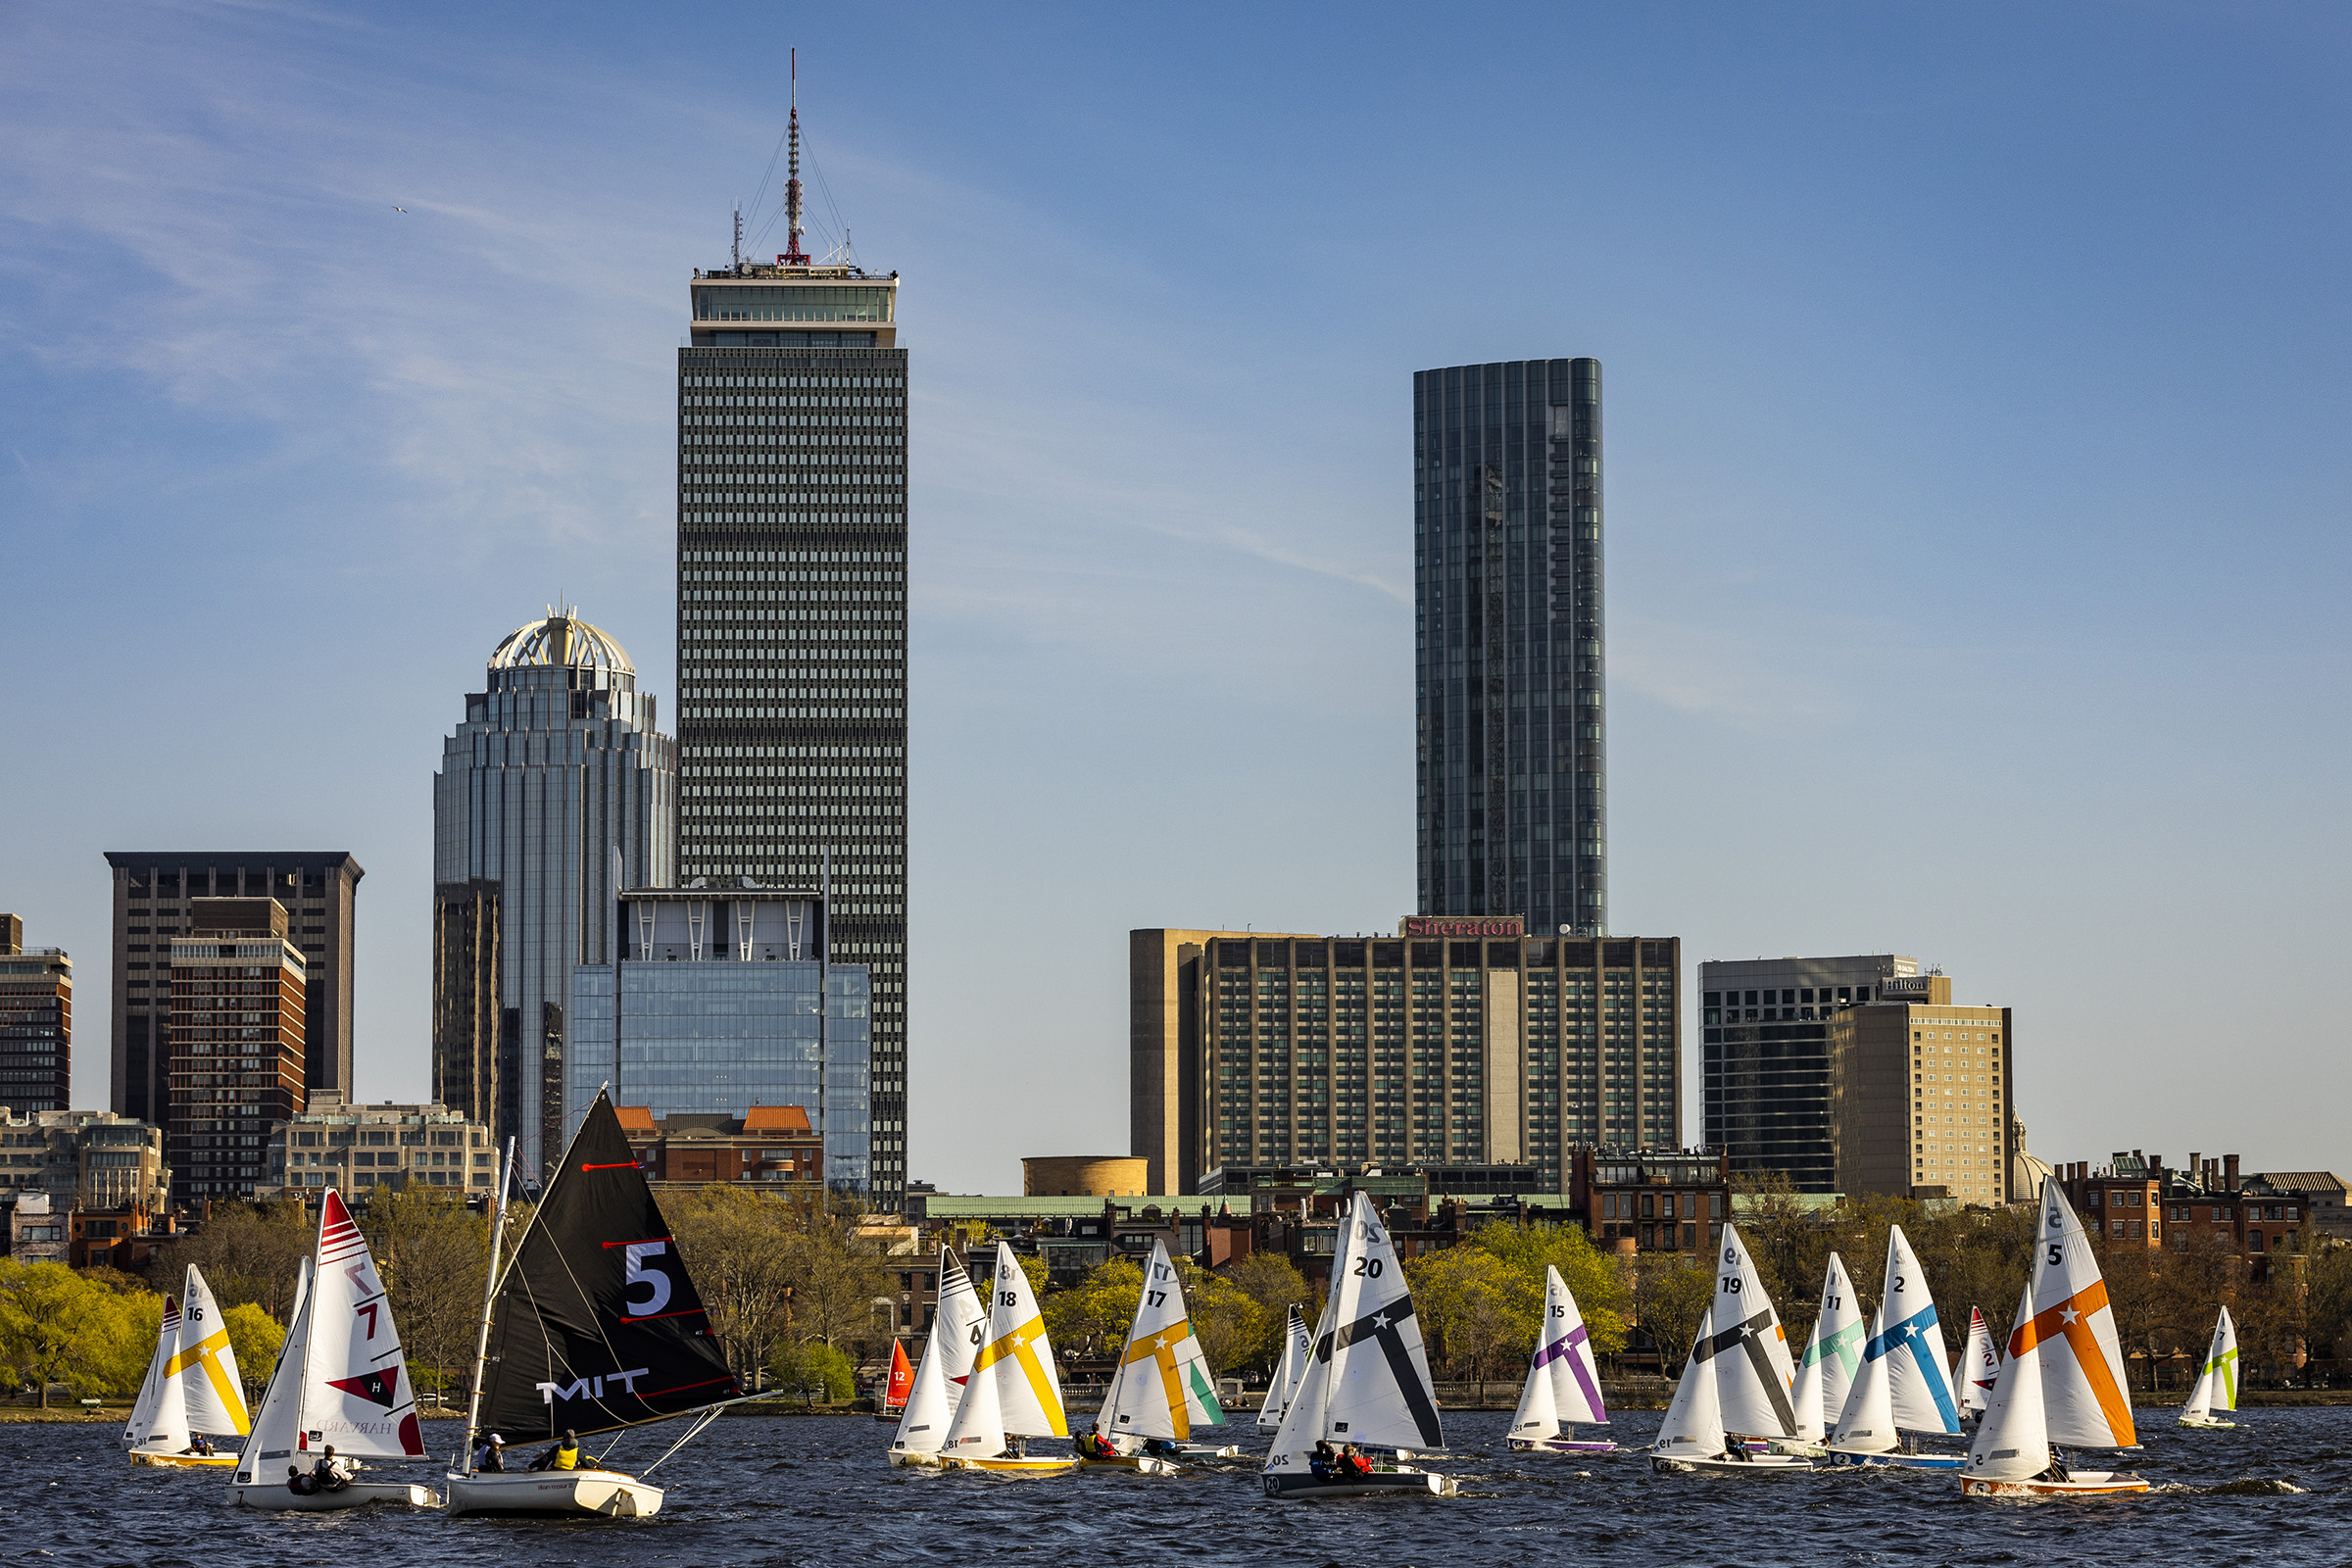 “It’s a place where people can escape the stresses of academic life at MIT. That’s really important. It keeps people fresh. It’s a way to be with friends and have fun and be powered by nature,” says Cucchiaro Family Sailing Master Fran Charles.